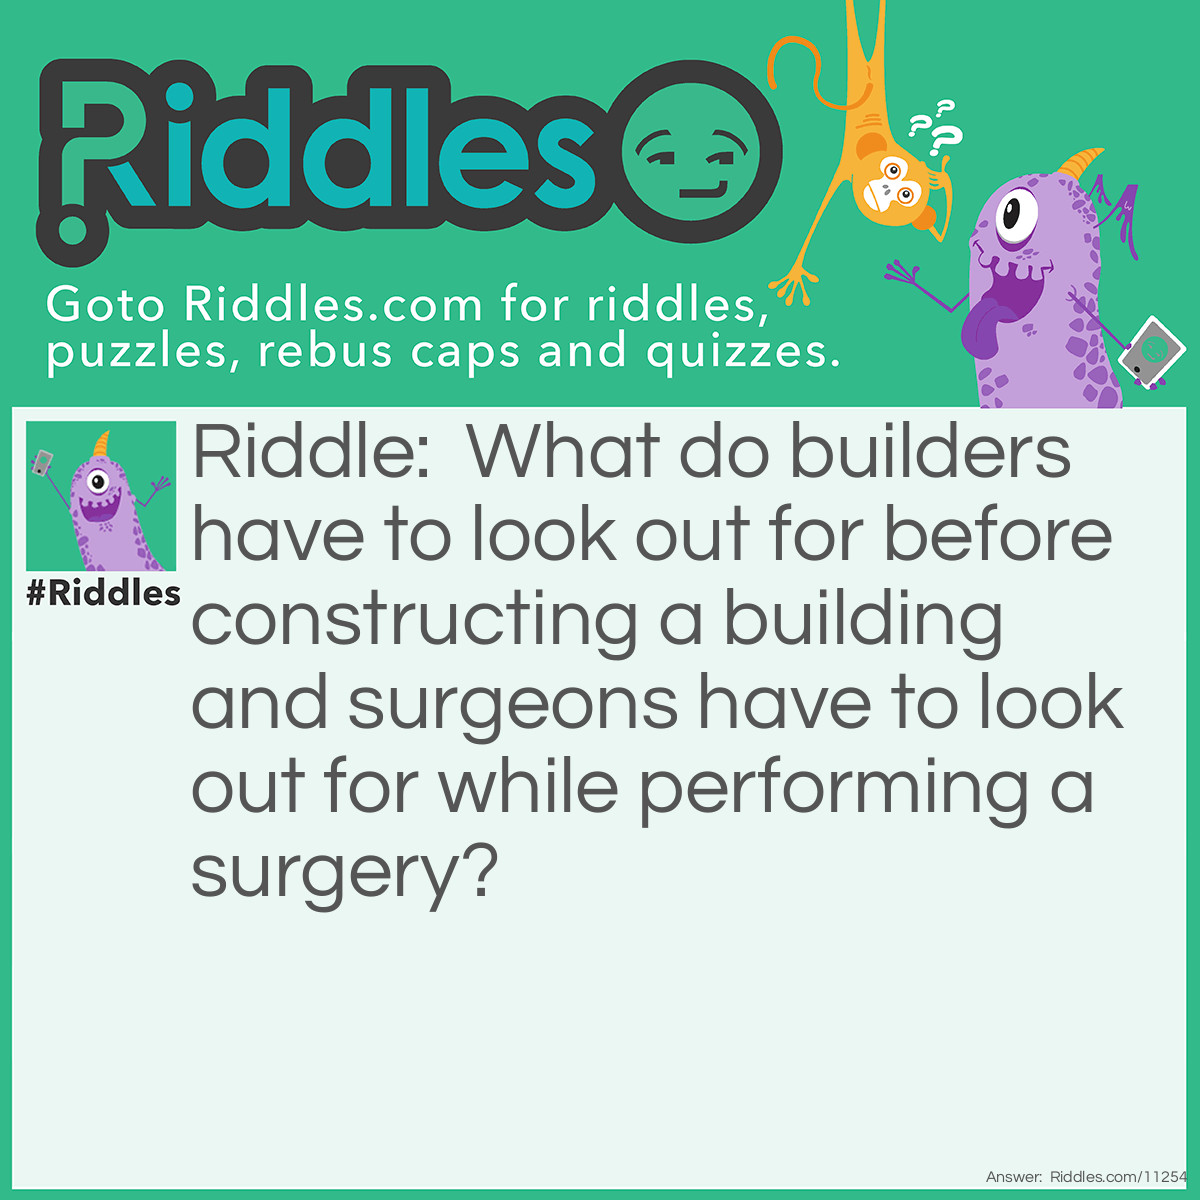 Riddle: What do builders have to look out for before constructing a building and surgeons have to look out for while performing a surgery? Answer: The skeleton.